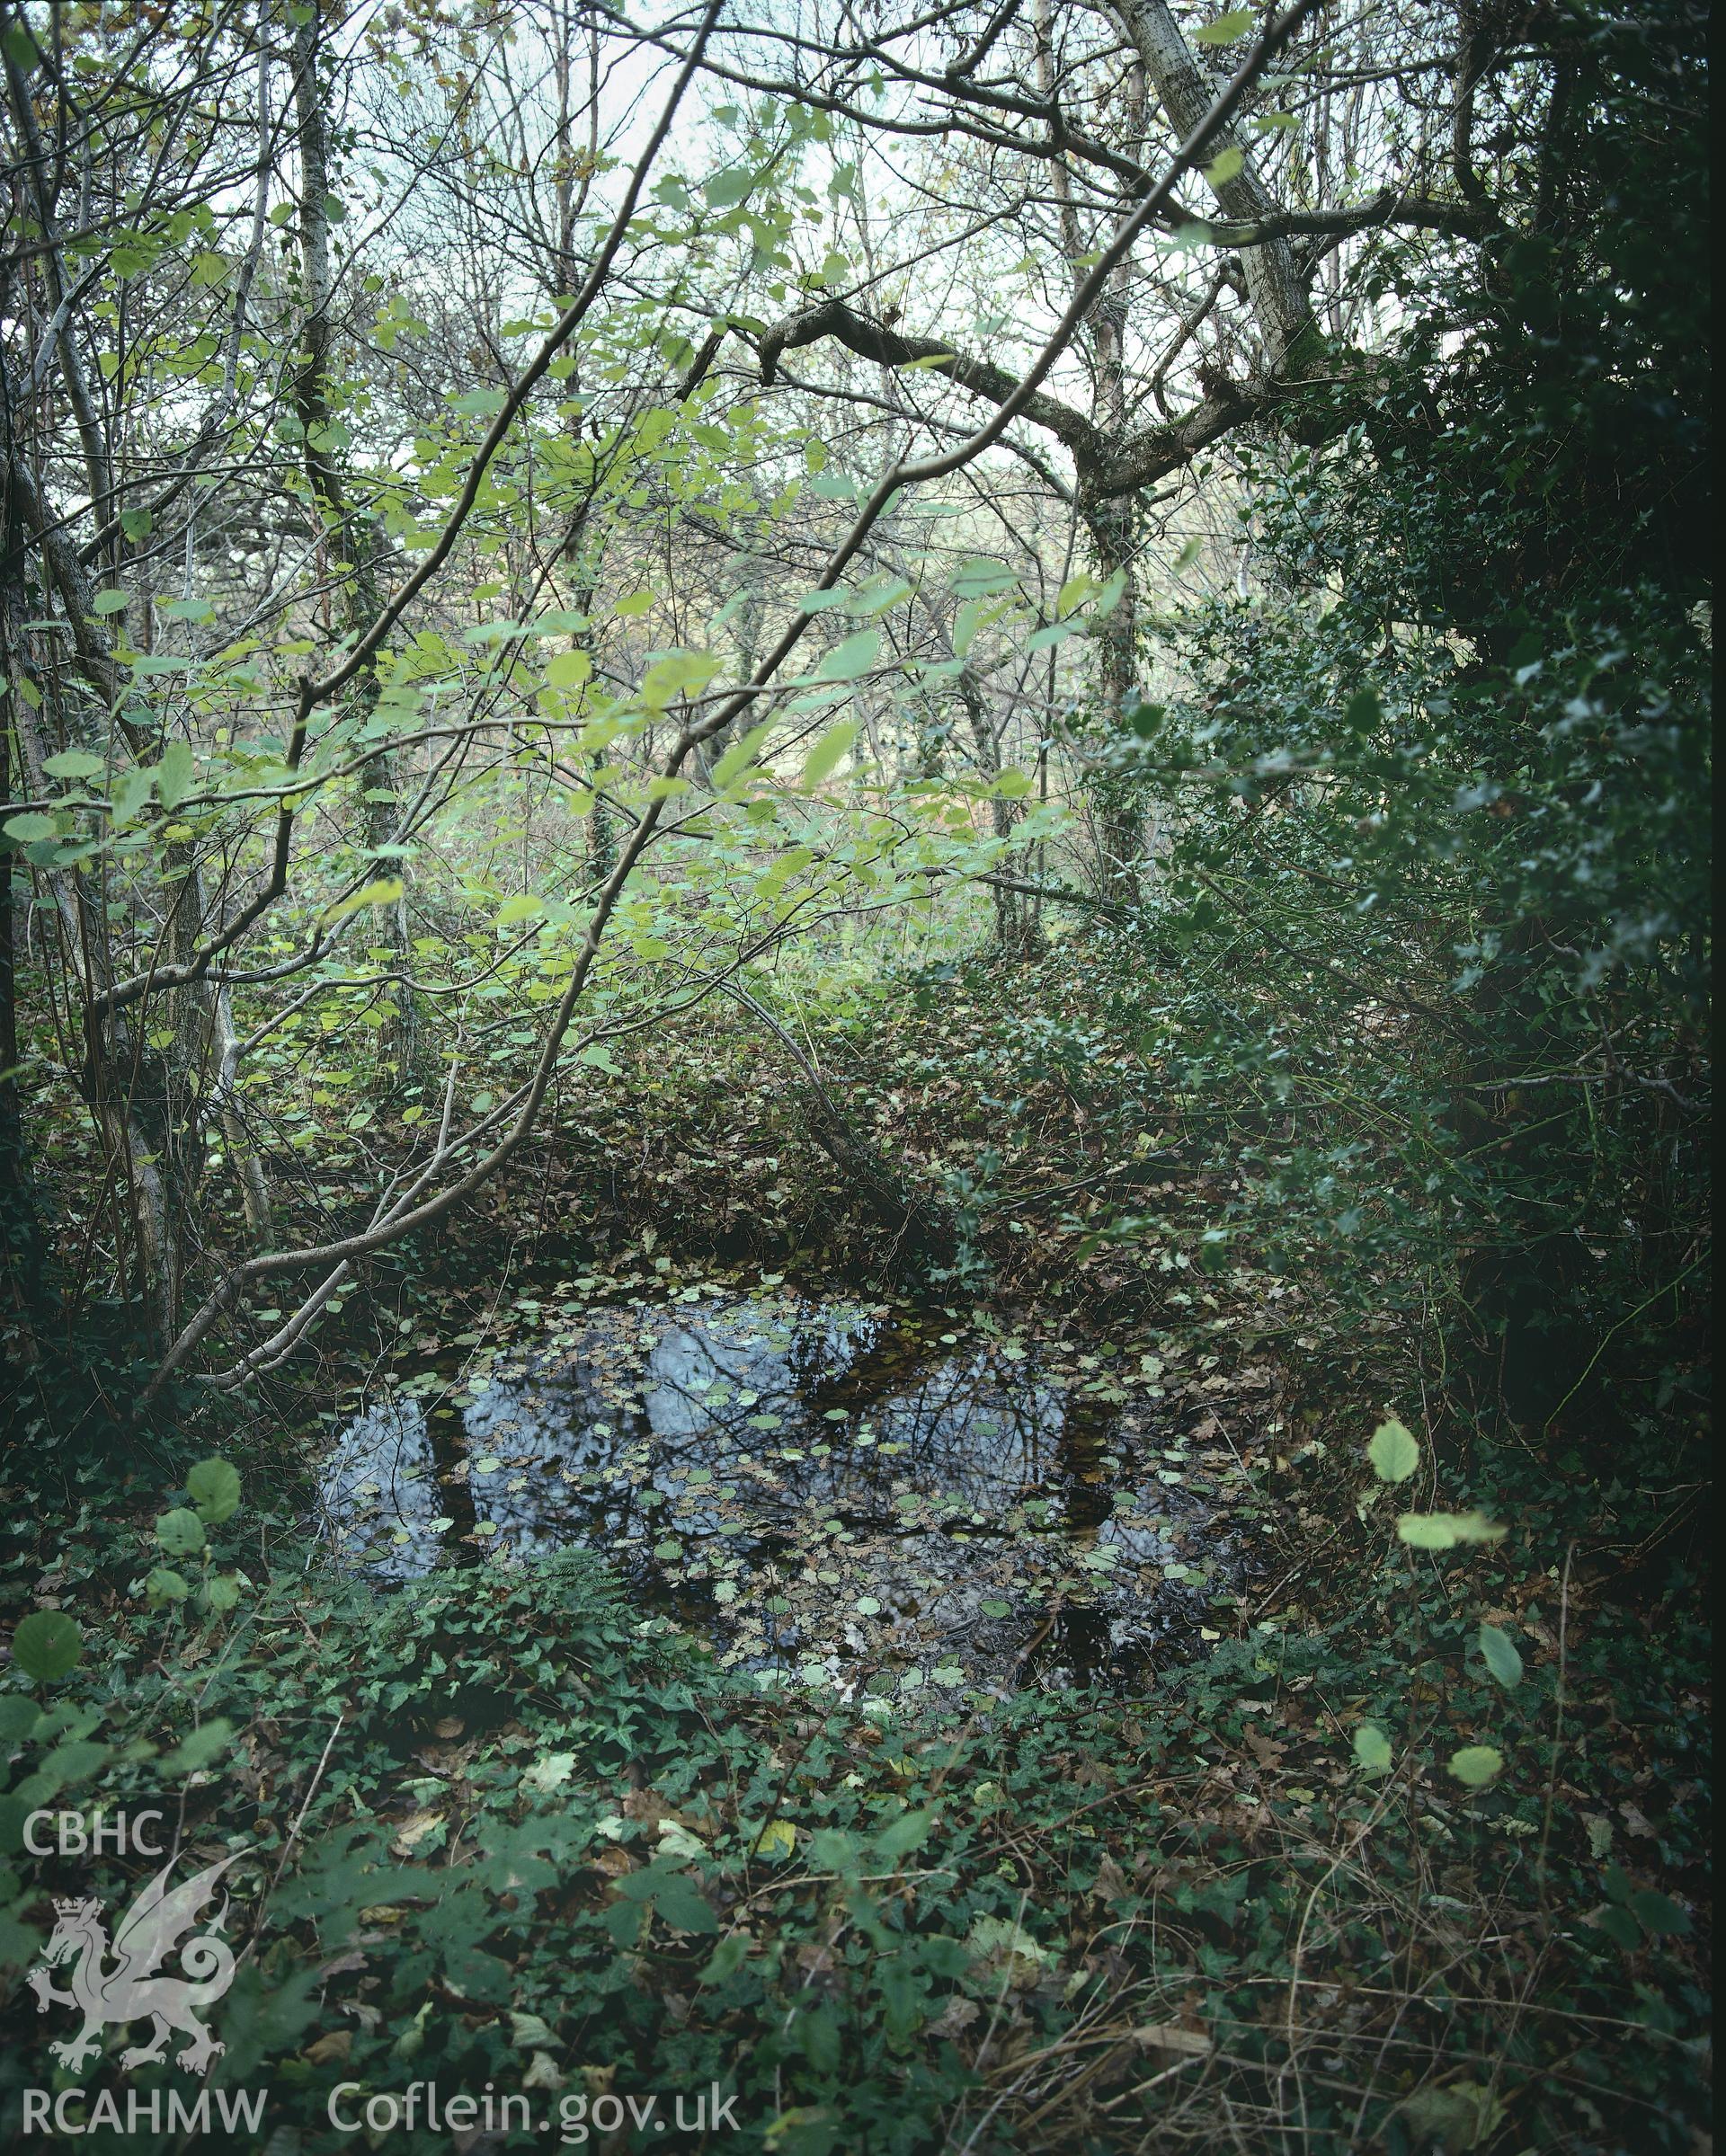 RCAHMW colour transparency showing flooded bell pits at a Country Park in the Swansea Valley